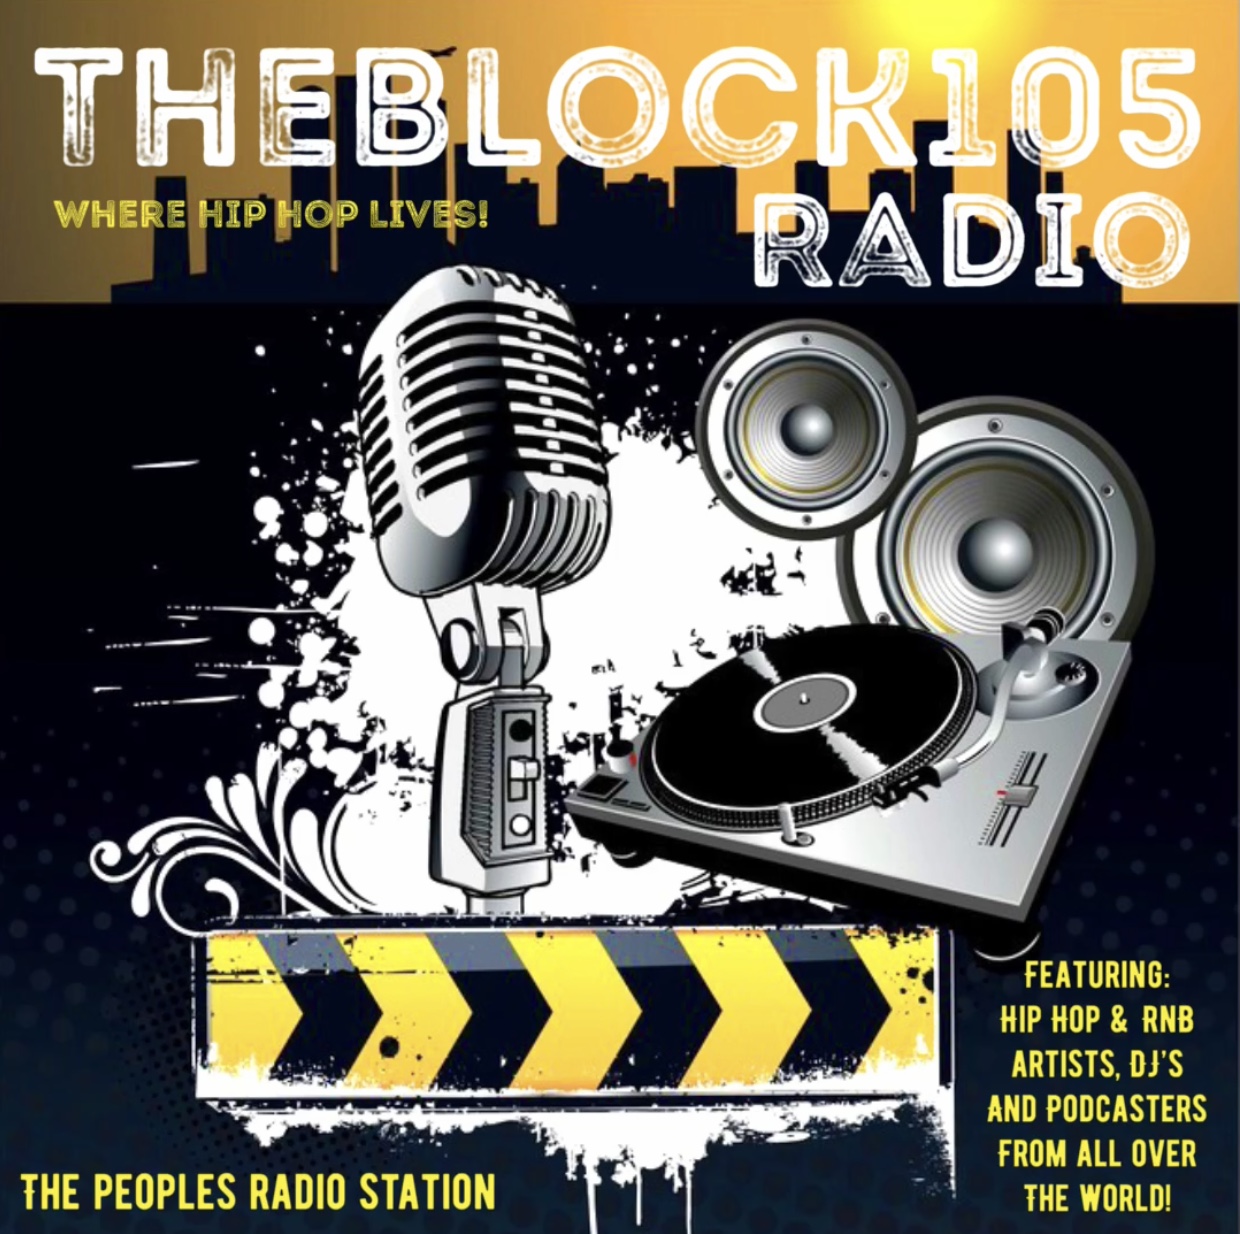 Art for The Block 105 Commercial Short Tag by The Block 105 Radio